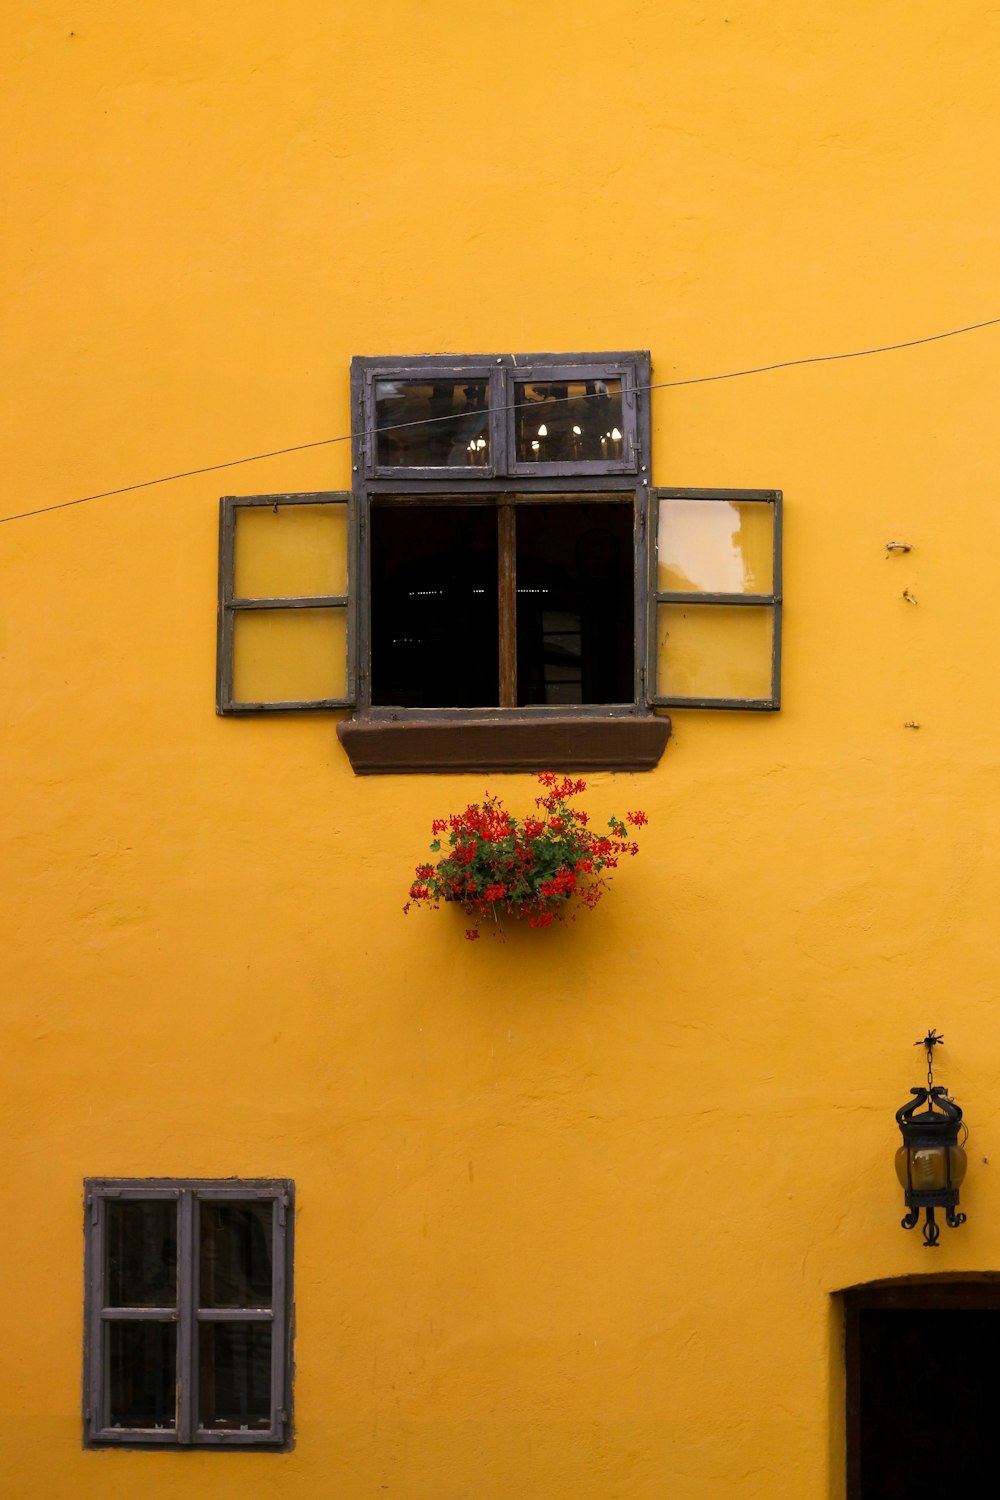 a yellow building with a window and flower box